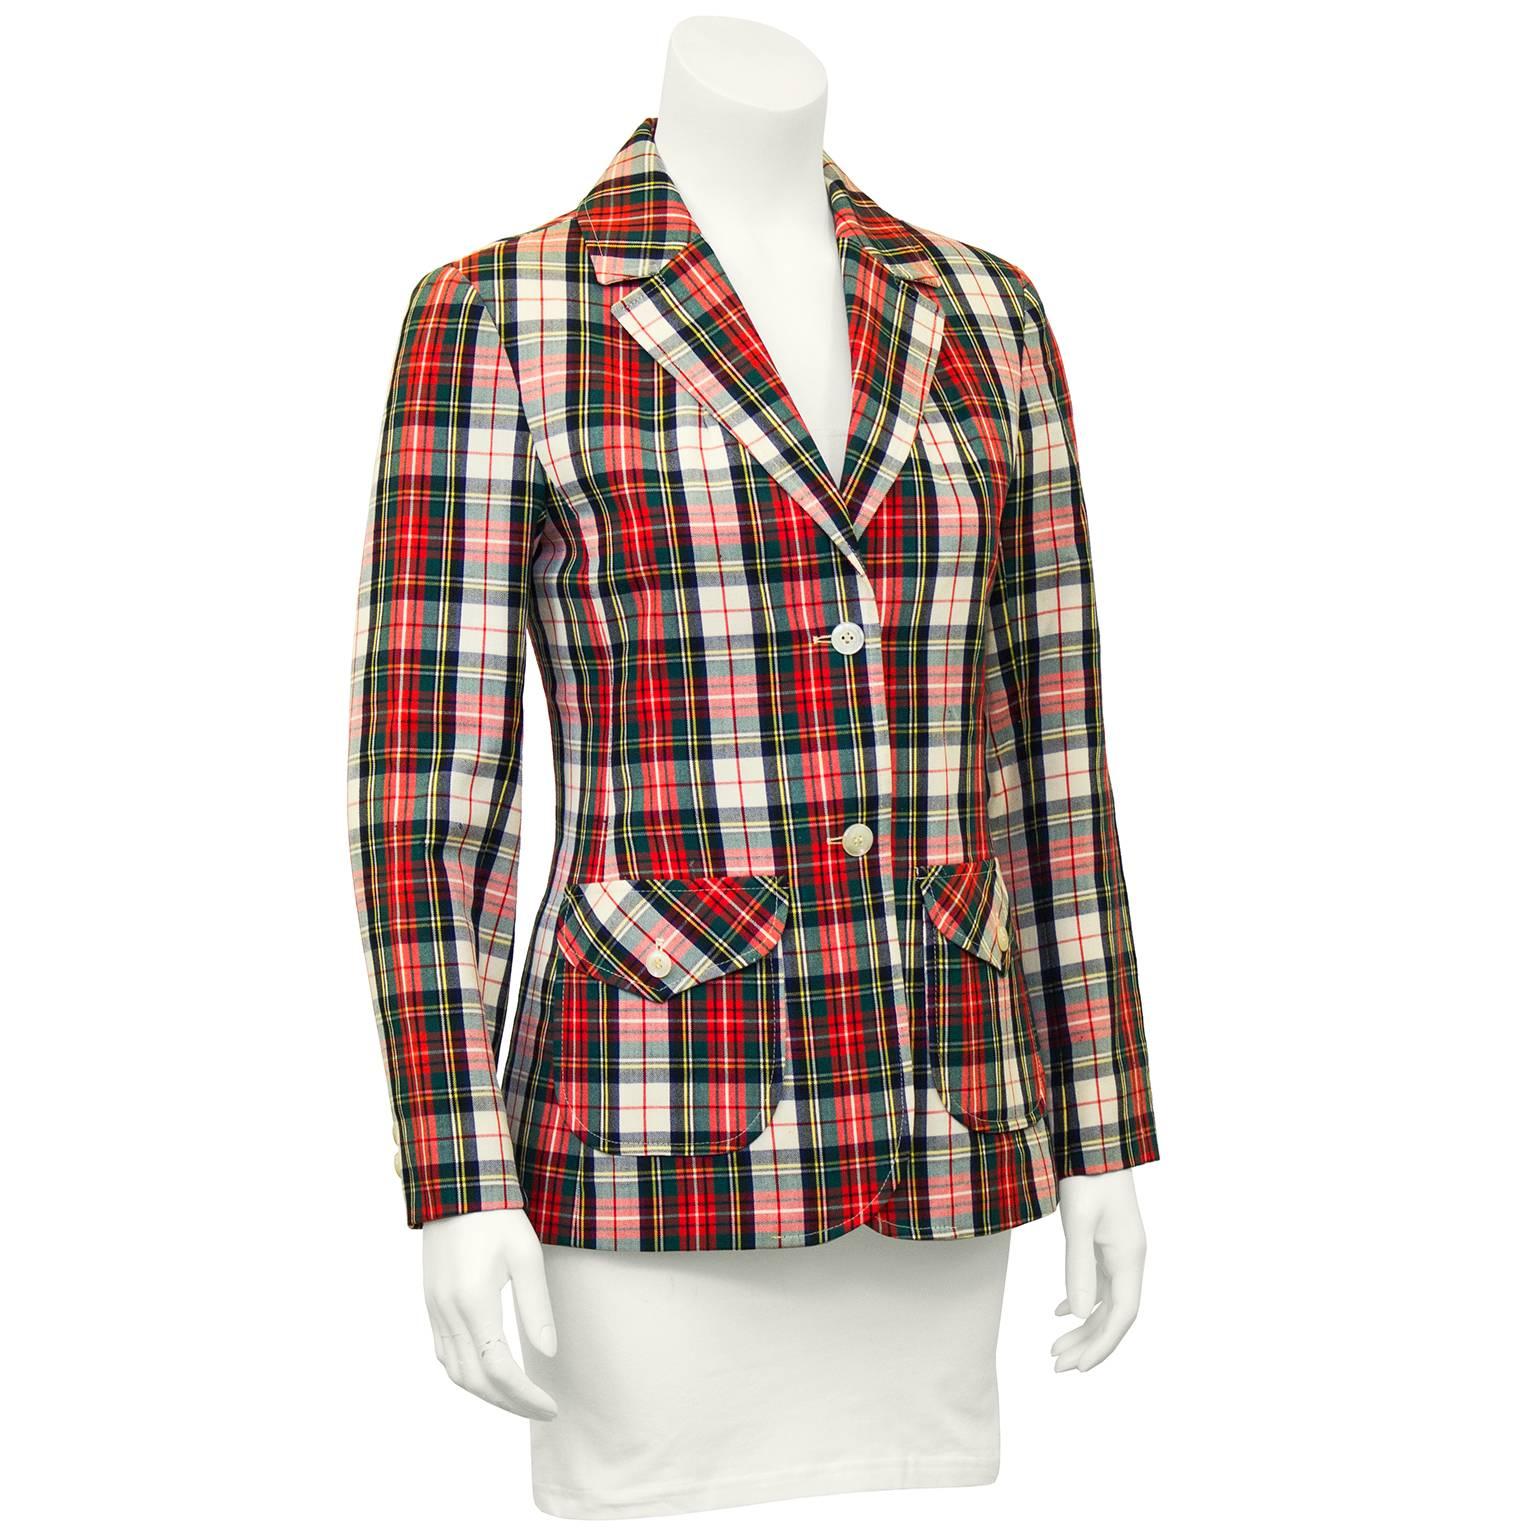 1960's red wool tartan jacket from Pendleton's junior line, Young Pendleton. All Pendleton products with white labels are womens (blue labels are mens). Great shape, single breasted with large patch pockets. Pendleton raised their own sheep and spun